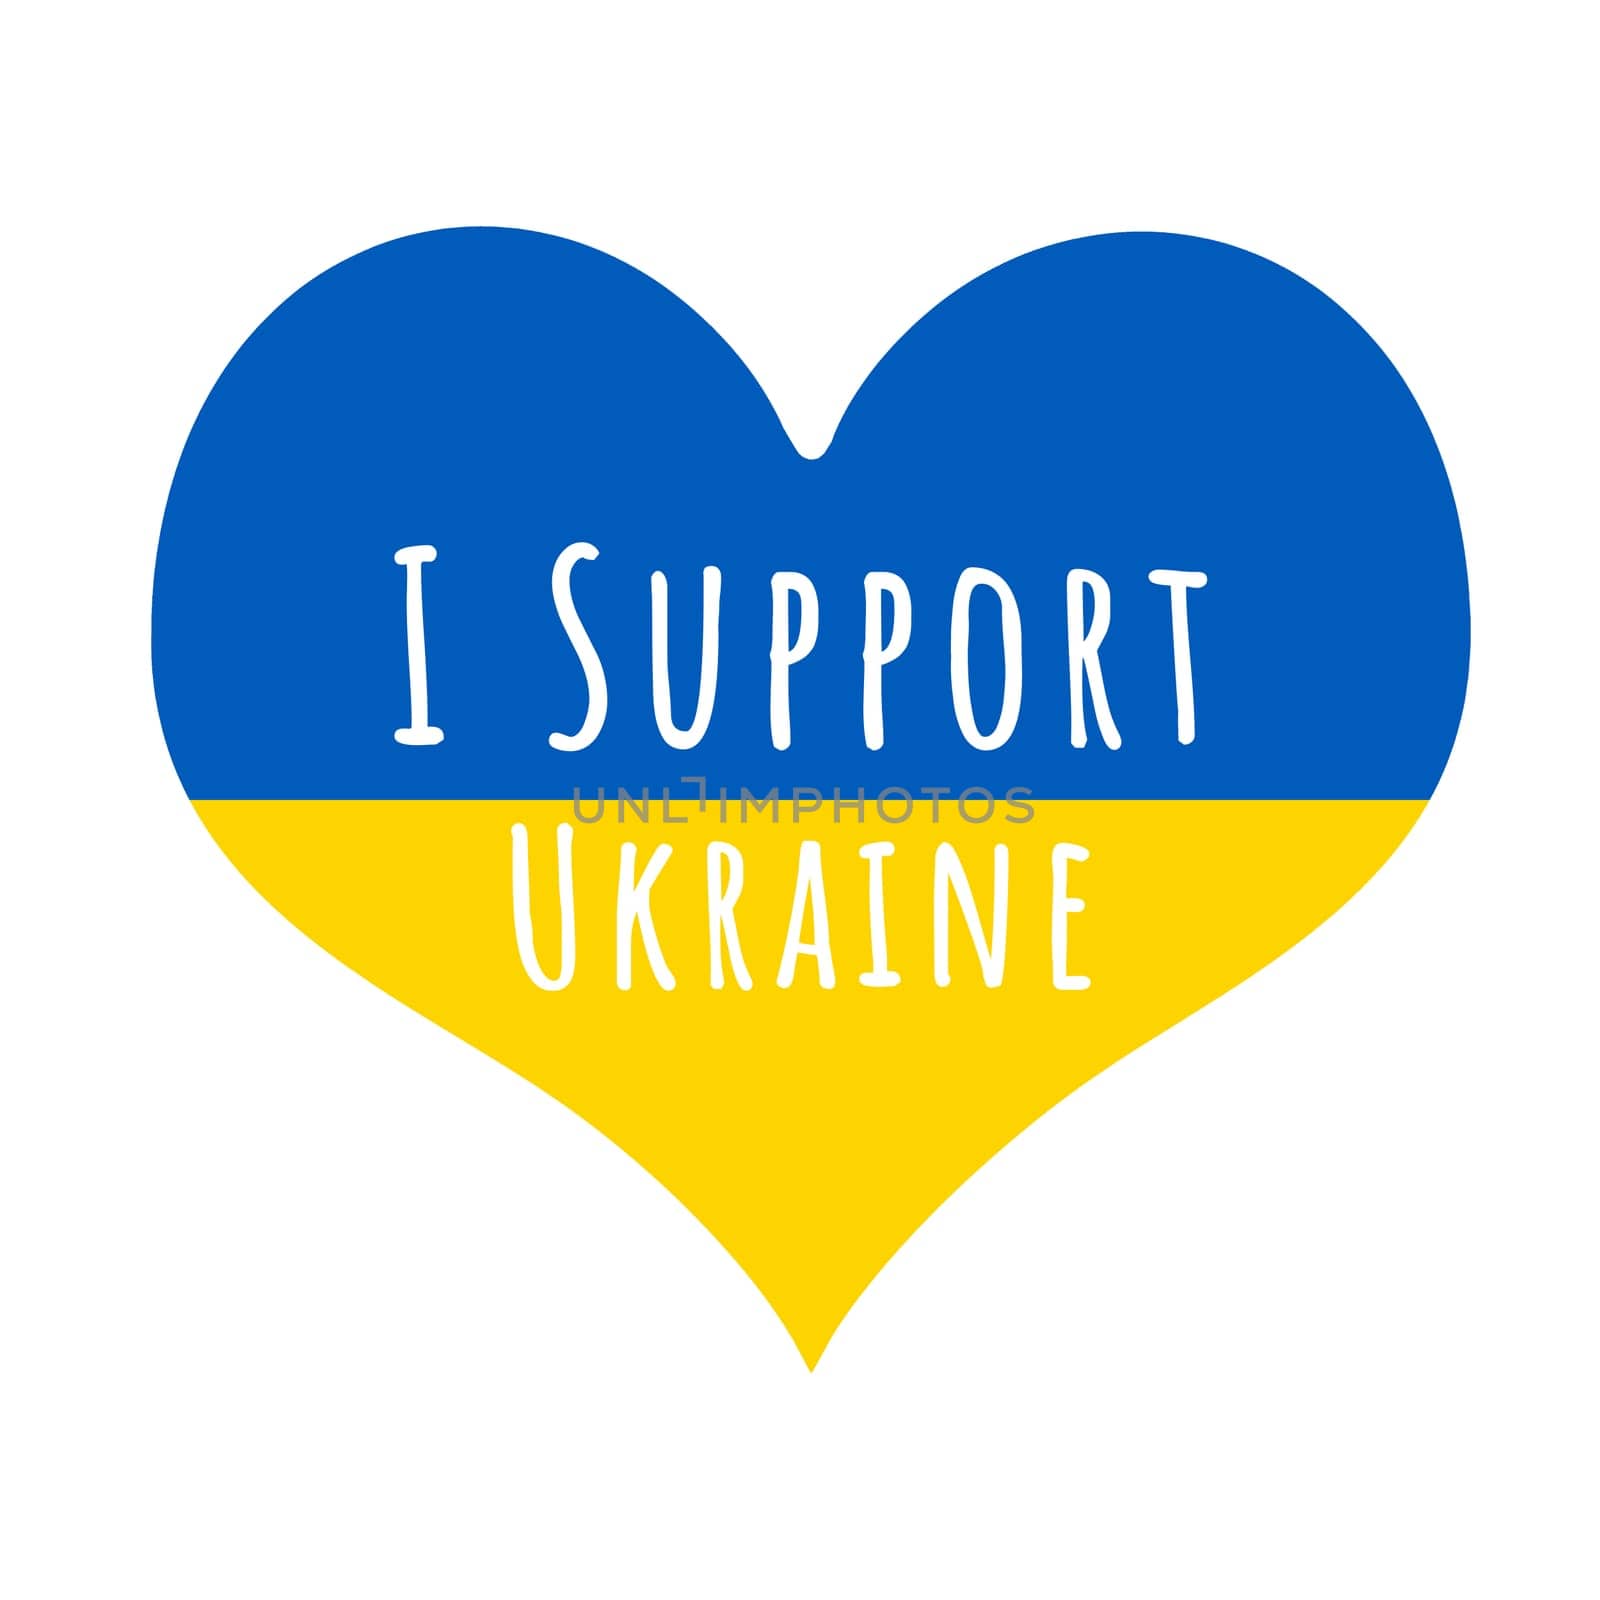 A love heart with the Ukraine flag and text "I Support Ukraine".